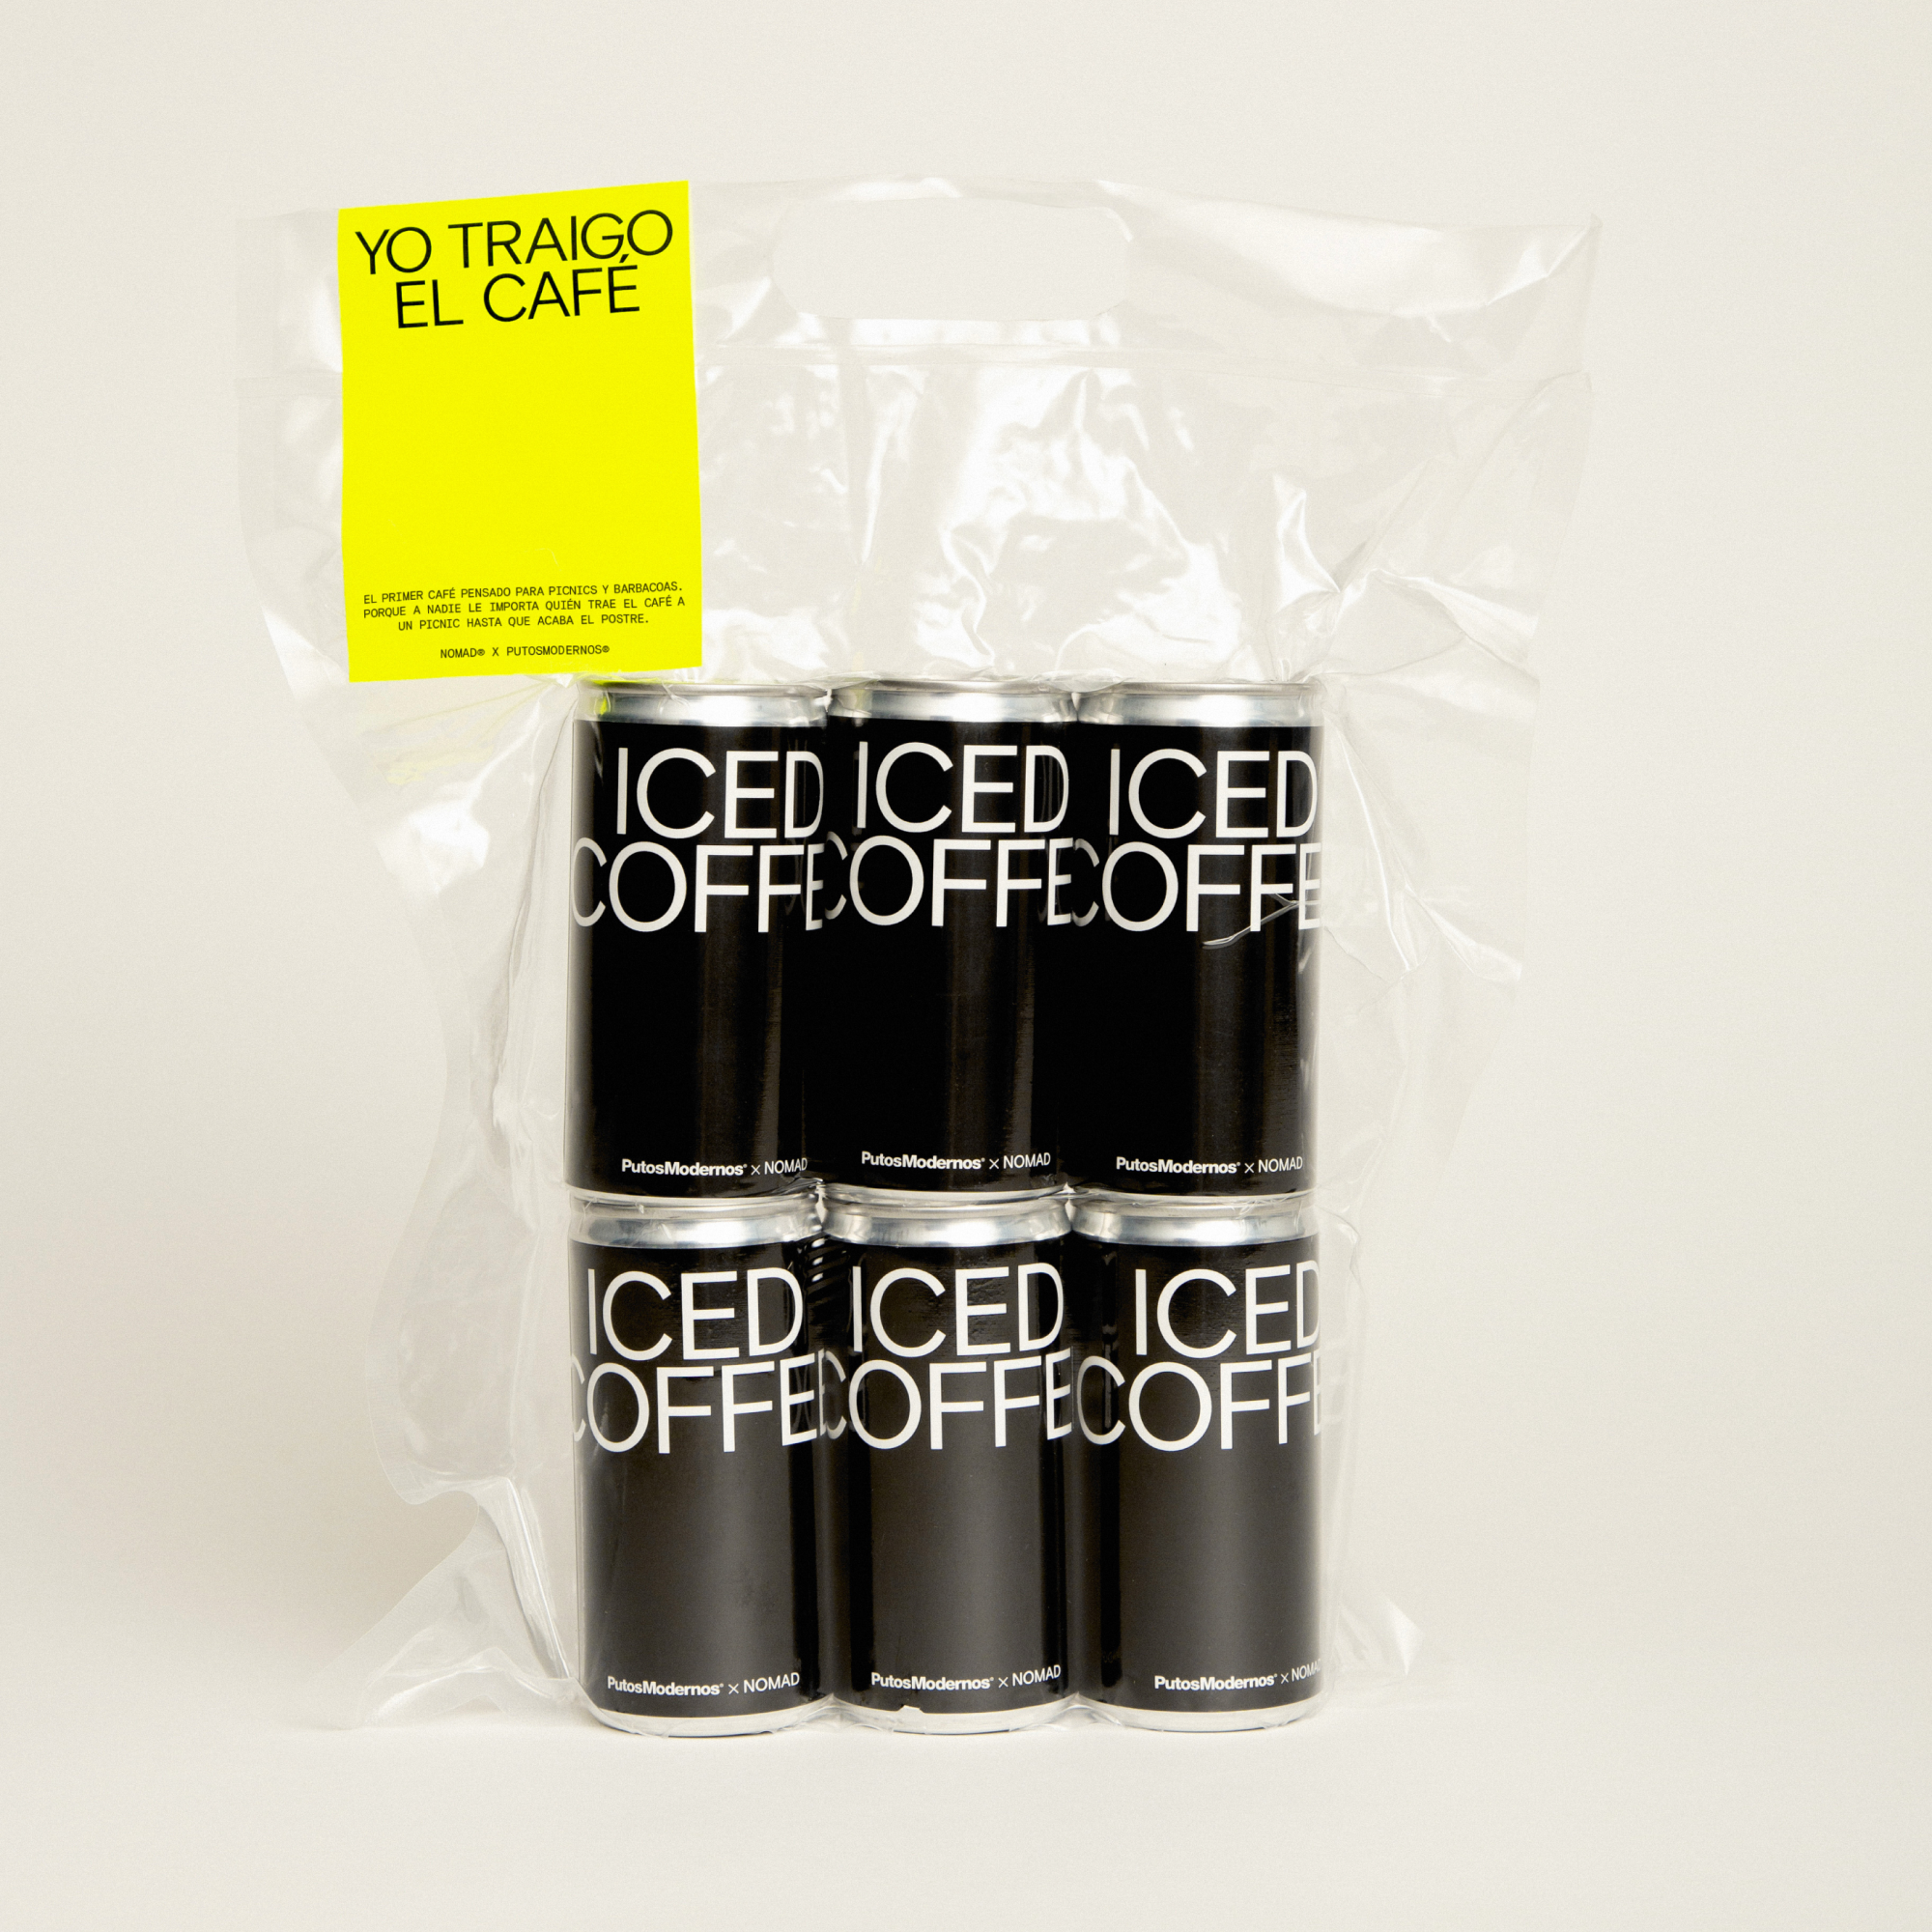 ICED COFFEE<br/>6 PACK